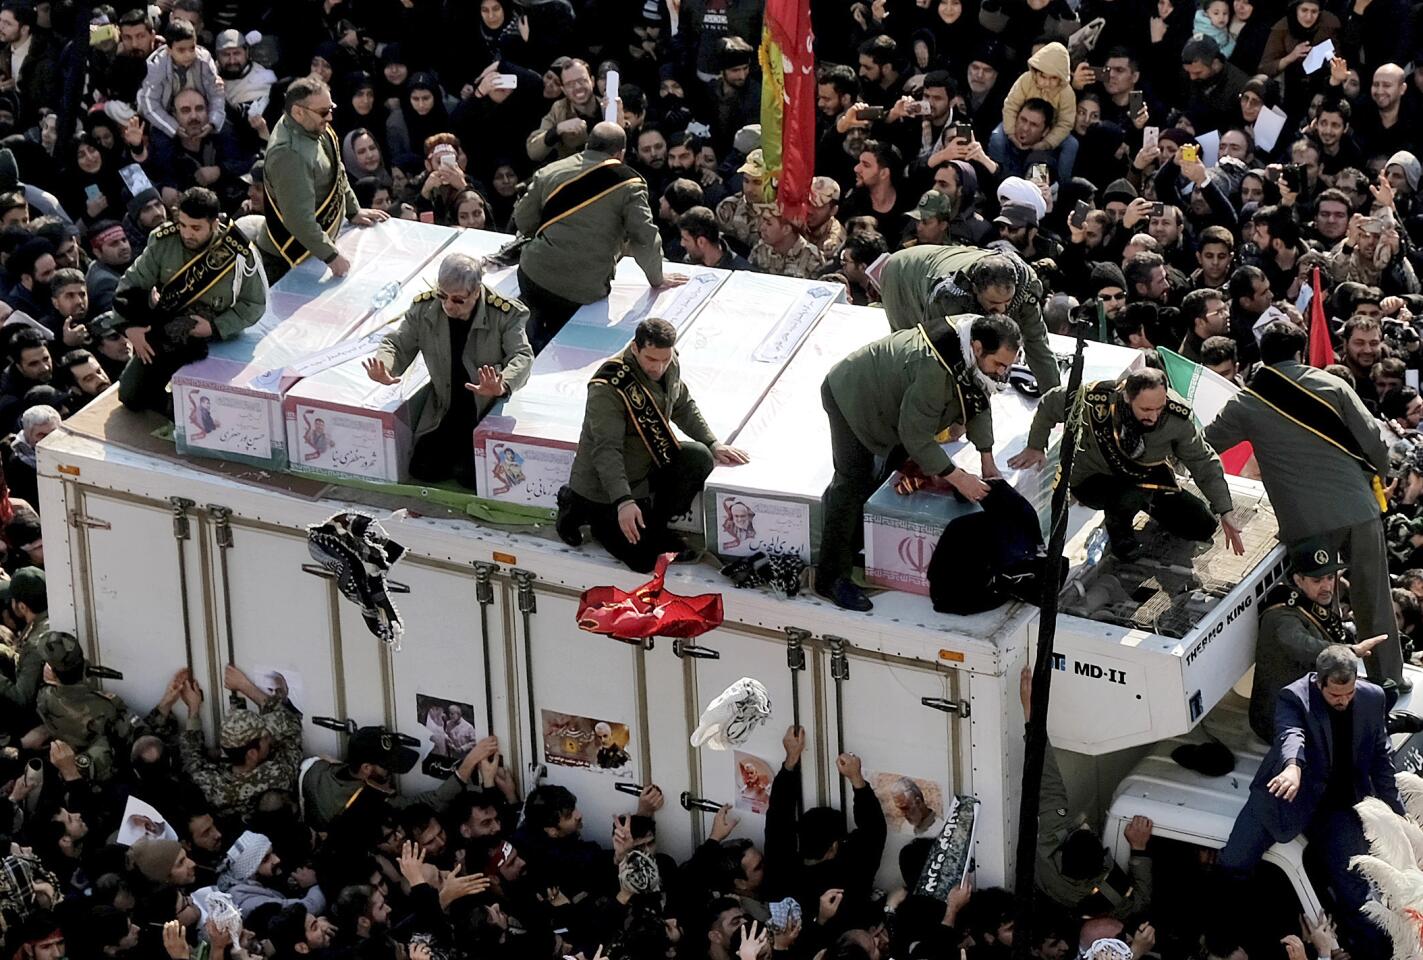 Coffins of Gen. Qassem Soleimani and others who were killed in Iraq by a U.S. drone strike, are carried on a truck surrounded by mourners during a funeral procession at the Enqelab-e-Eslami (Islamic Revolution) square in Tehran, Iran, Monday, Jan. 6, 2020. The processions mark the first time Iran honored a single man with a multi-city ceremony. Not even Ayatollah Ruhollah Khomeini, who founded the Islamic Republic, received such a processional with his death in 1989. Soleimani on Monday will lie in state at Tehran's famed Musalla mosque as the revolutionary leader did before him. (AP Photo/Ebrahim Noroozi)